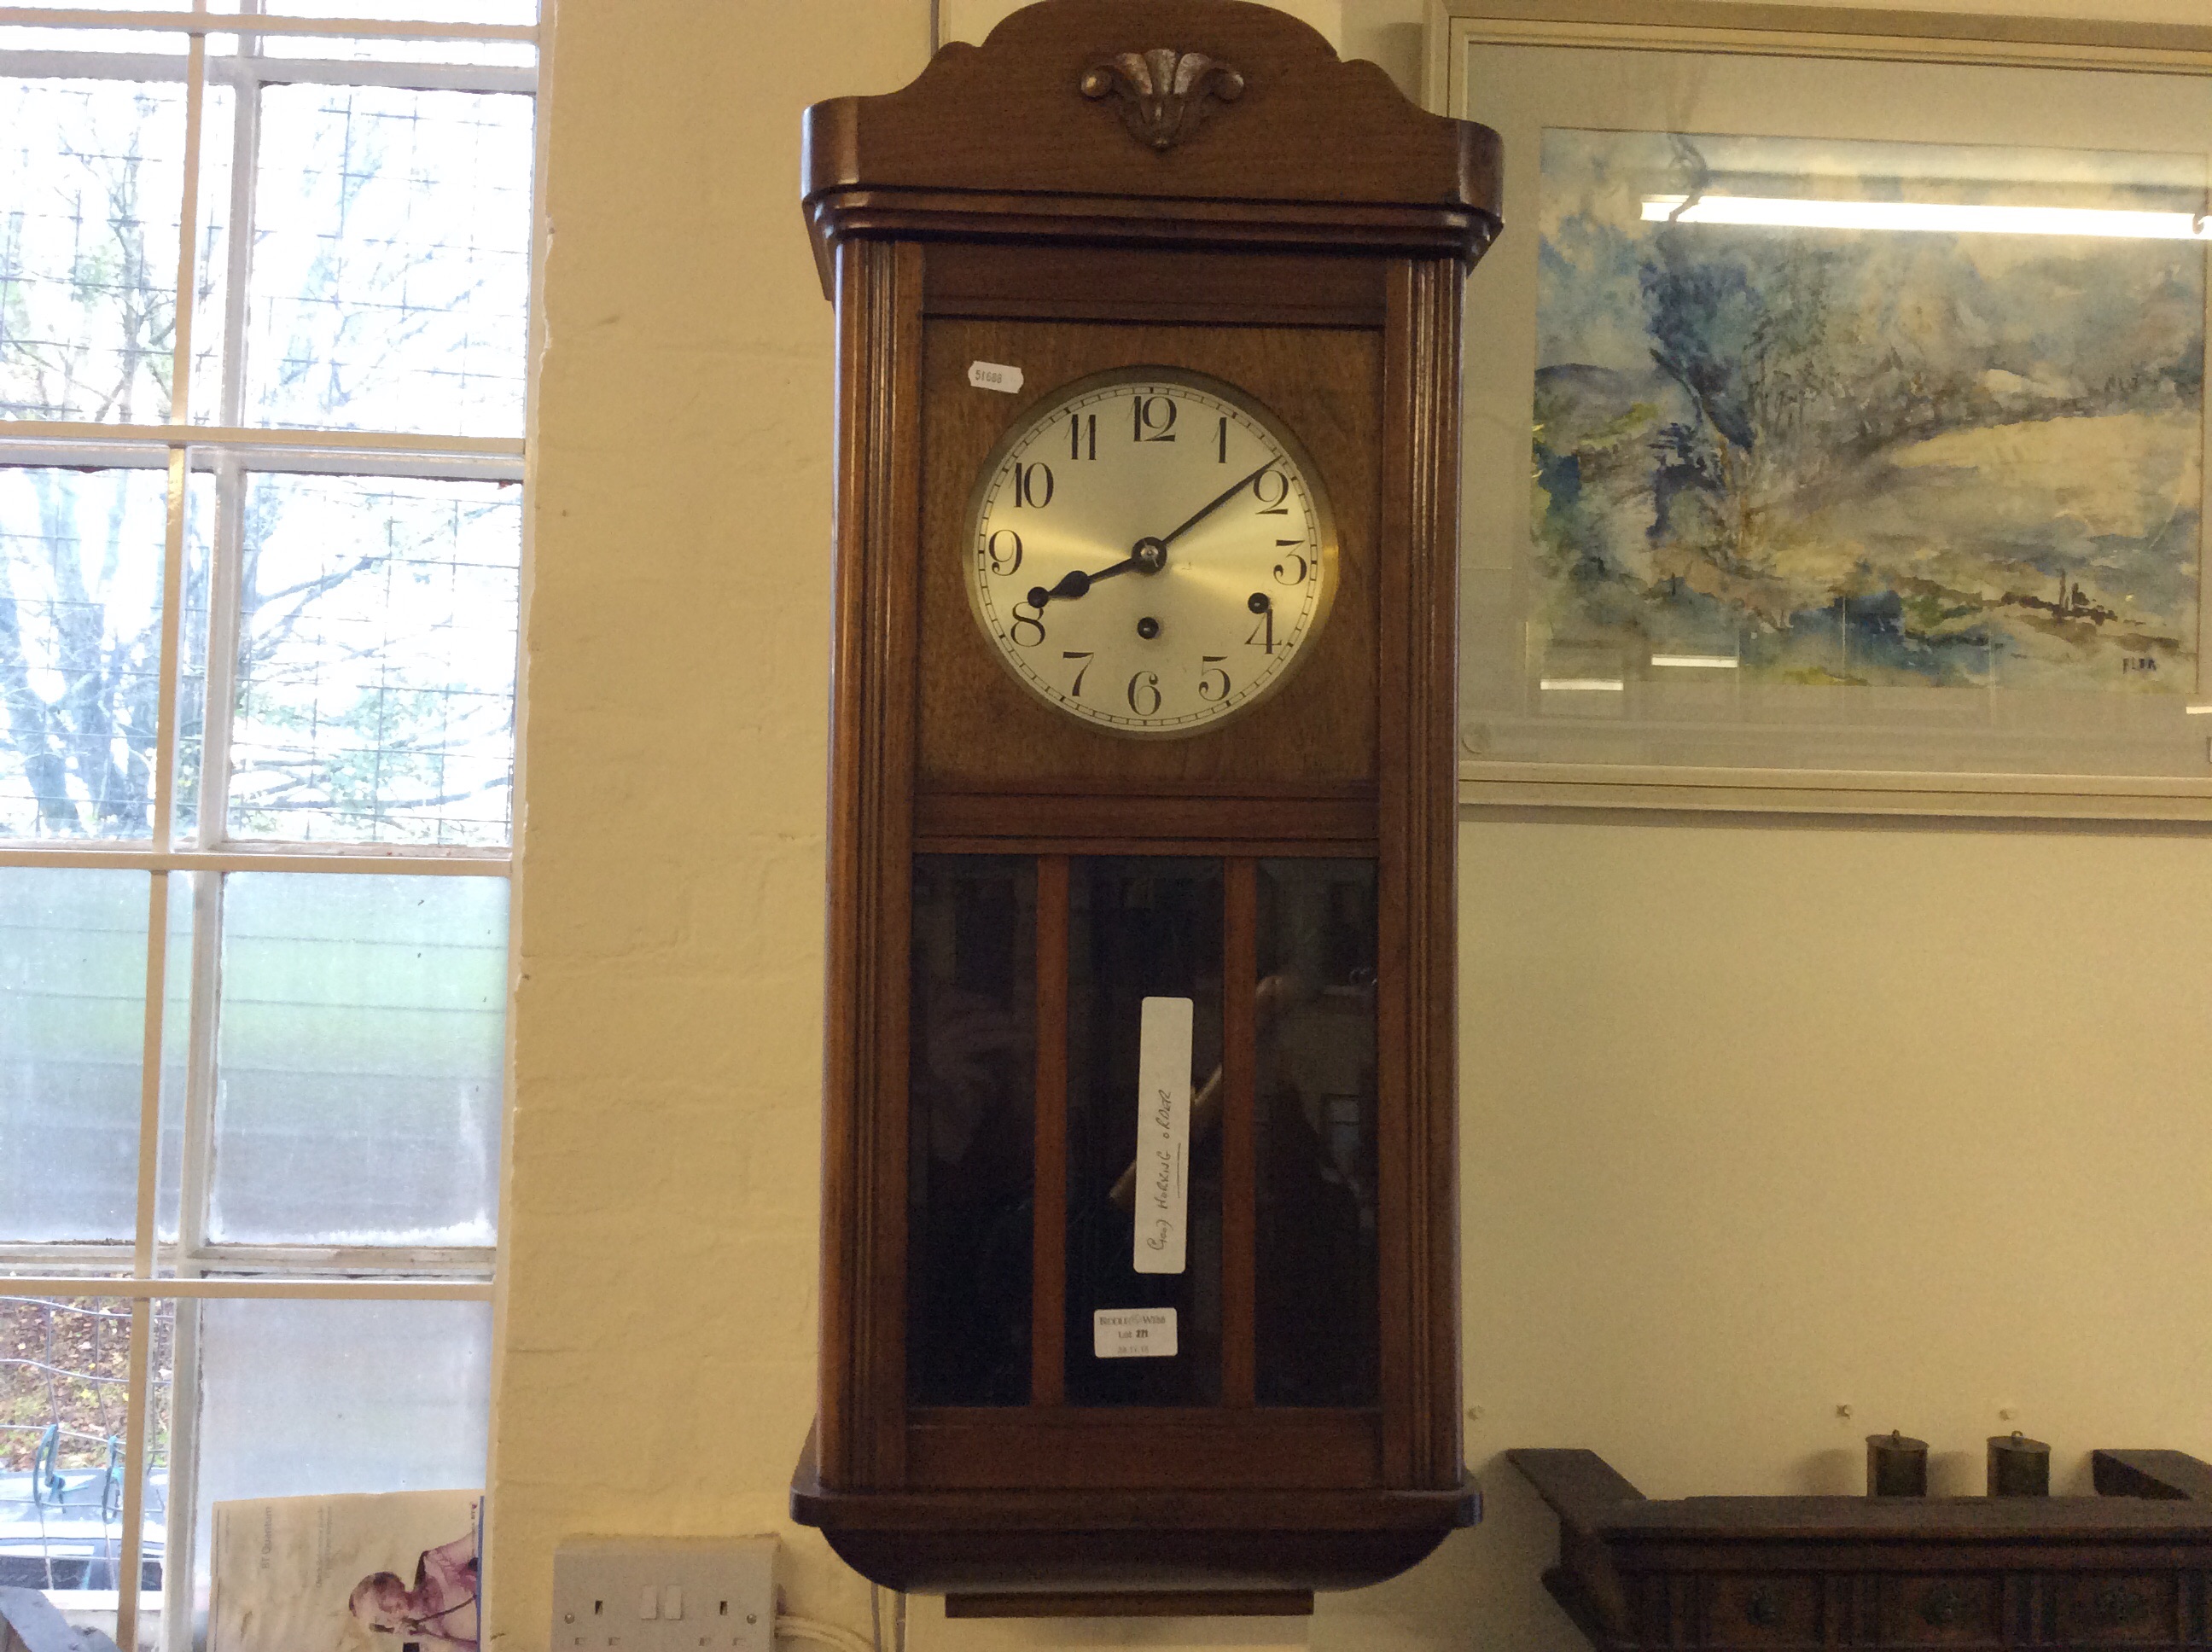 A mahogany wall mounted clock with pendulum and chimes, in good working order.